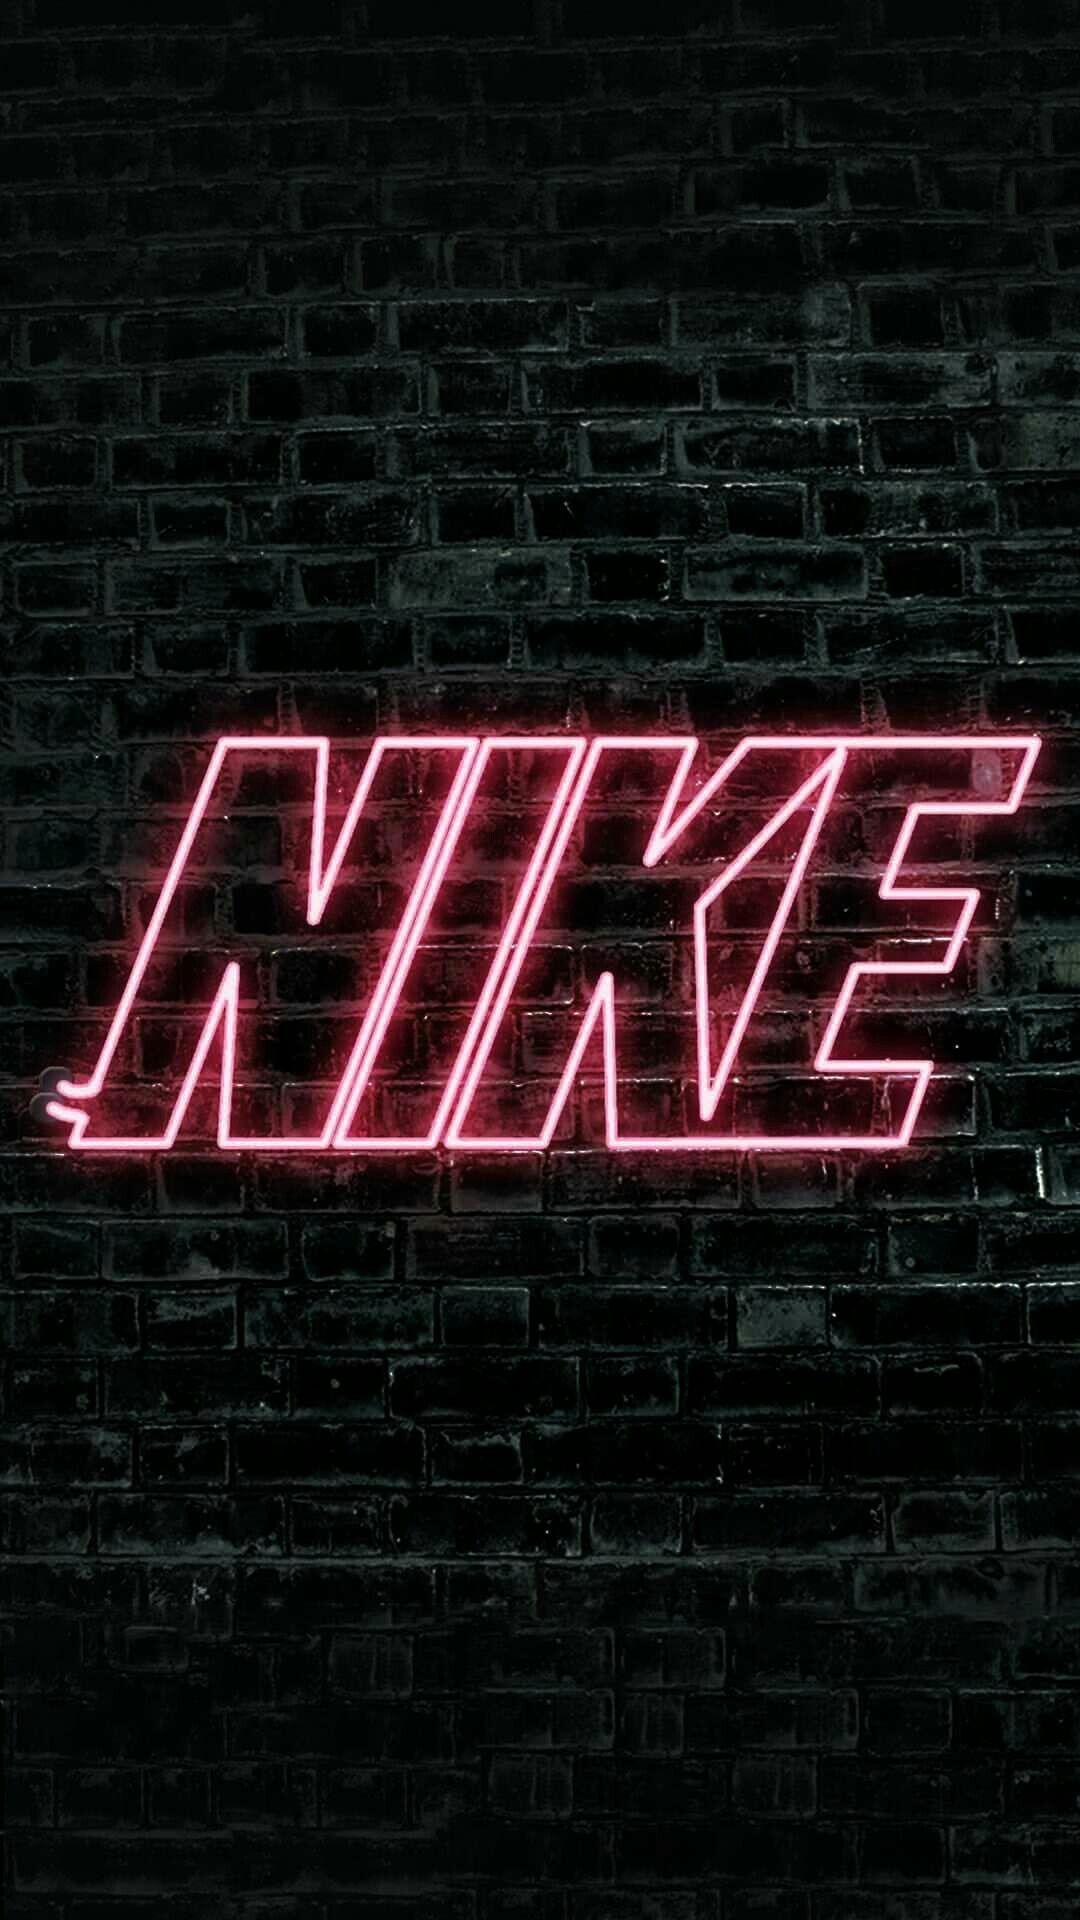 Nike+ just do it. Wallpaper and Nike